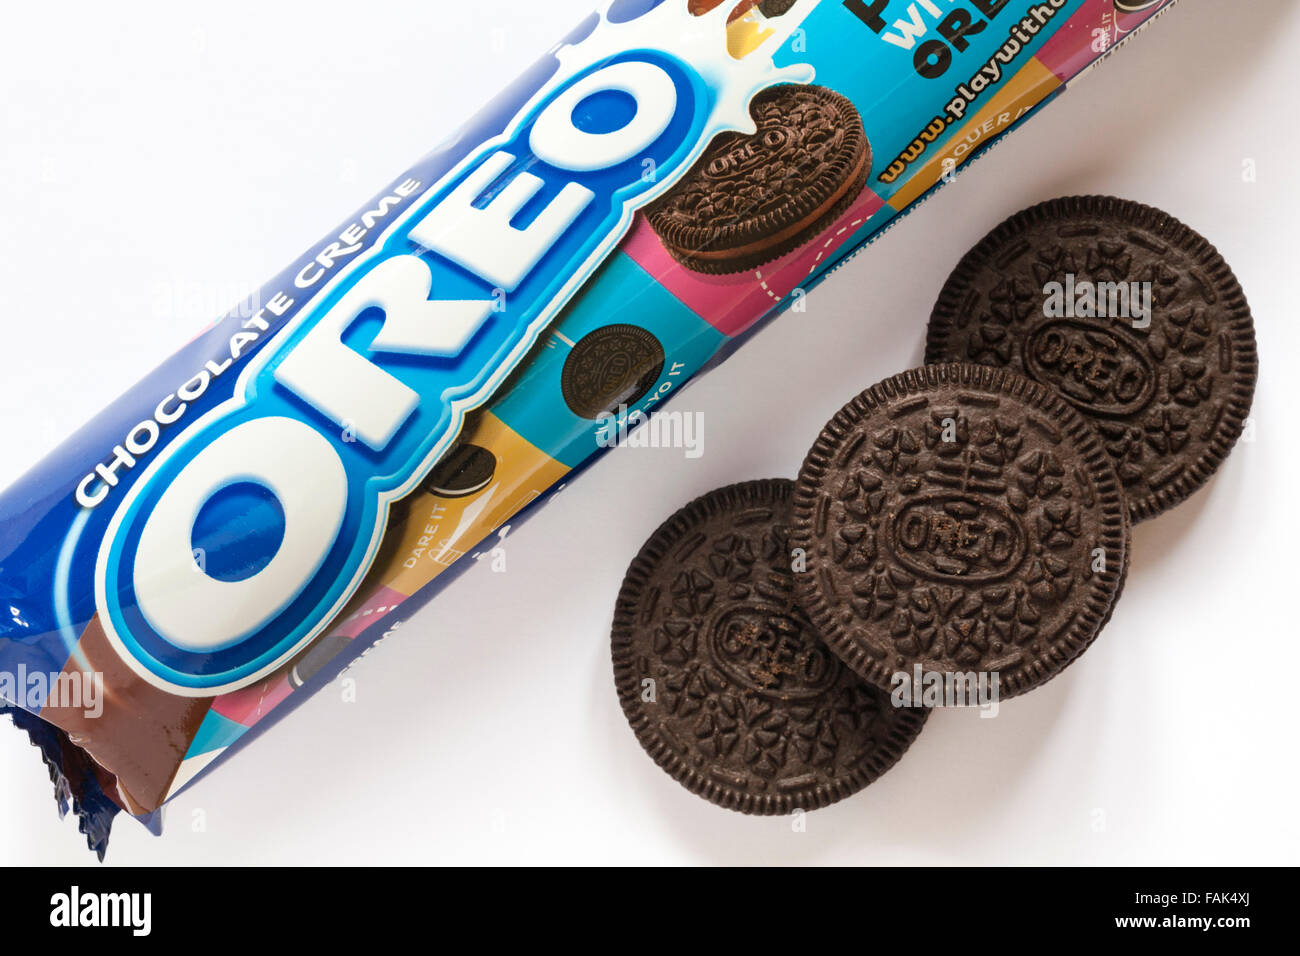 Oreo Biscuits High Resolution Stock Photography and Images - Alamy